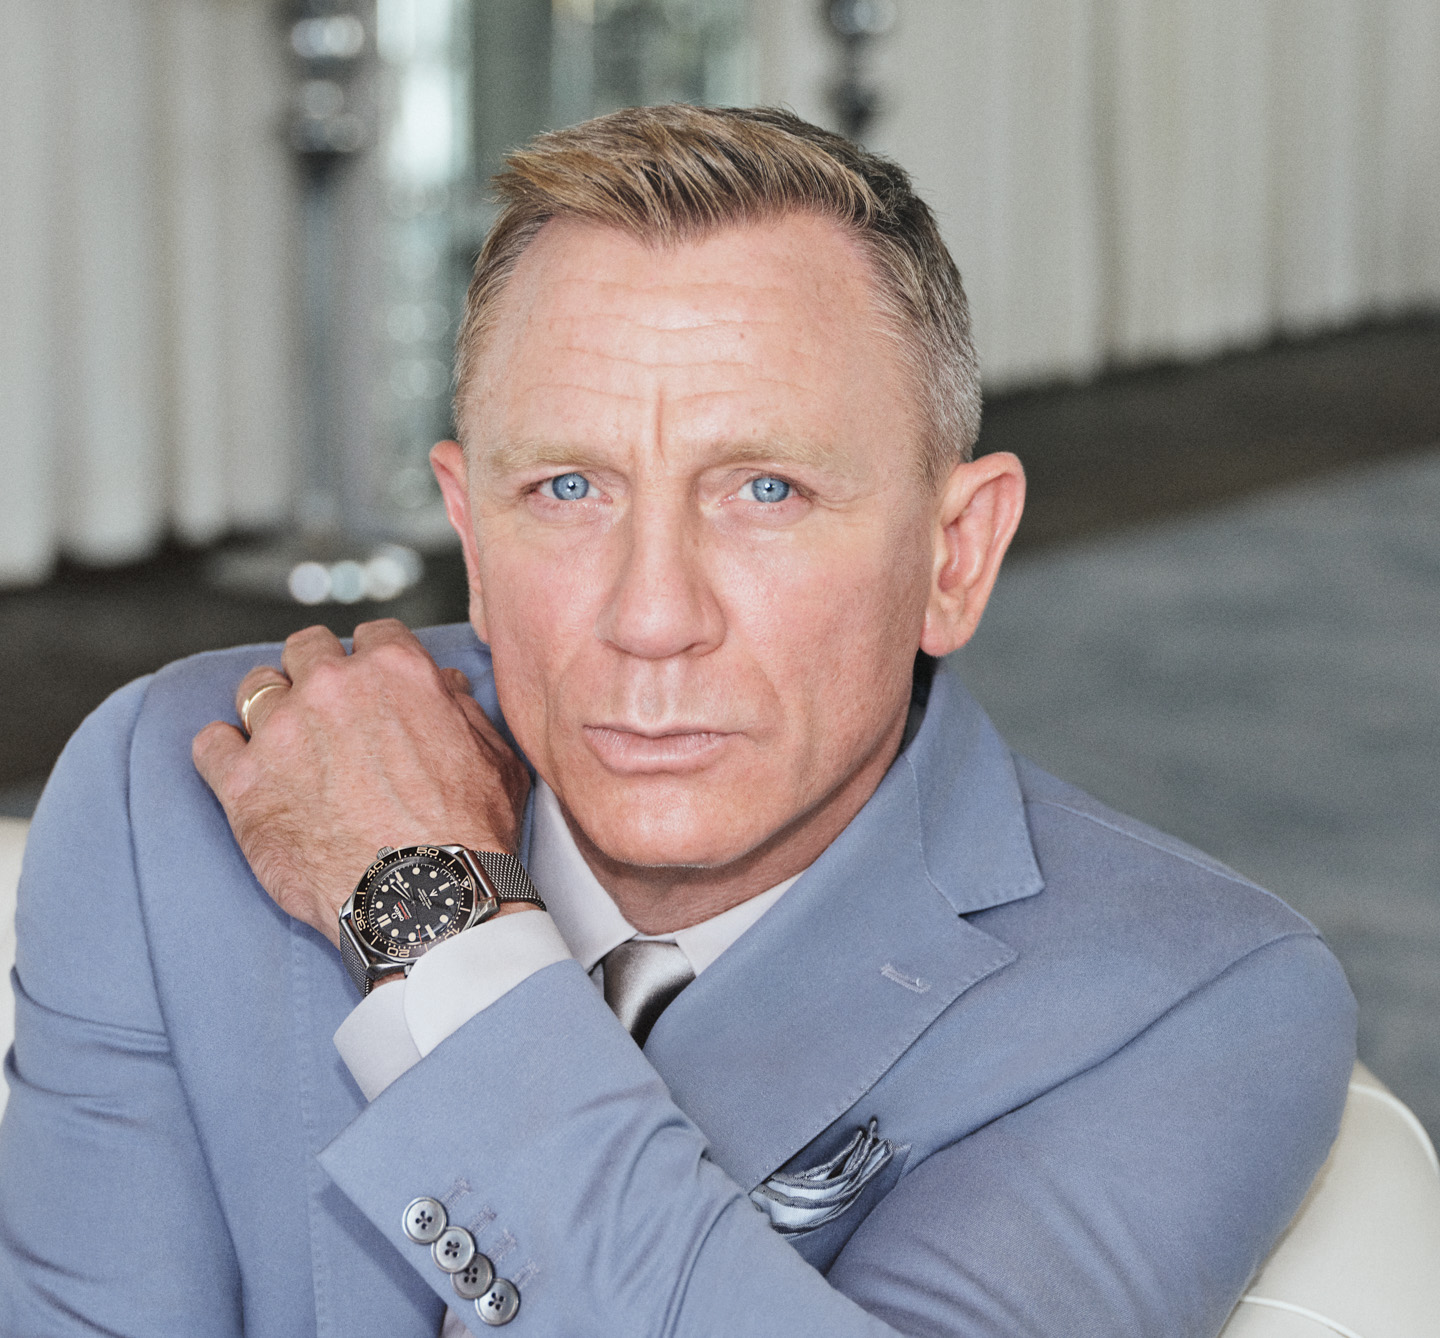 temperament seksuel matron Hands-On: Omega Seamaster 300M 007 'No Time To Die' Watch For Daniel Craig  | aBlogtoWatch